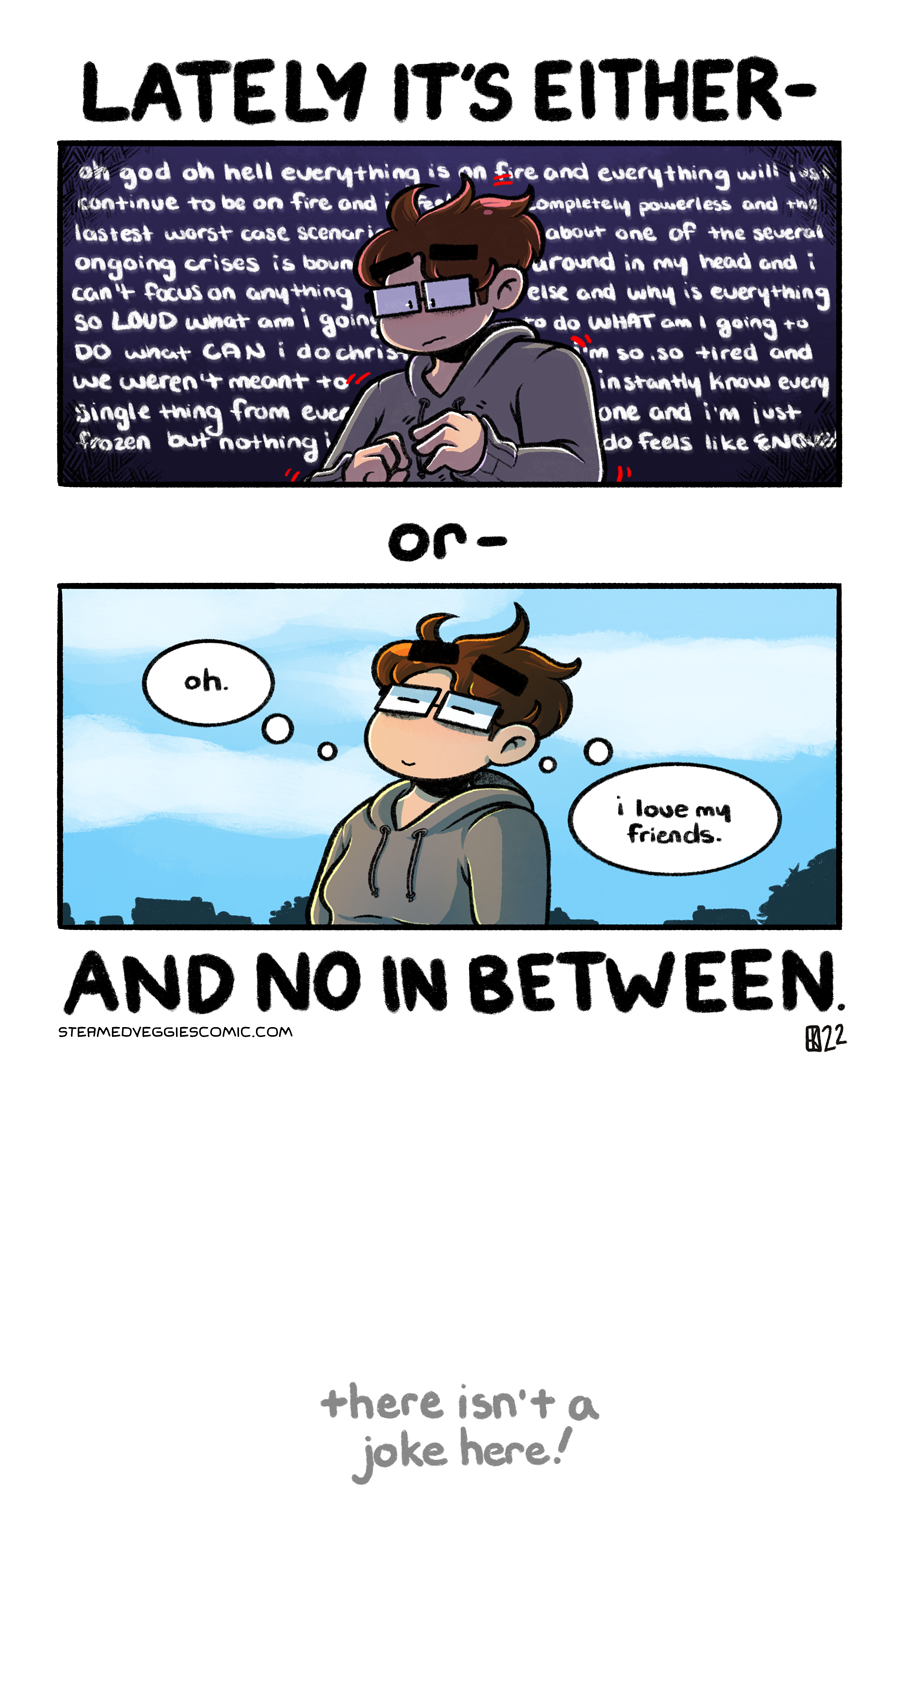 A two panel, full color comic. Above the first panel, text reads "Lately it's either--" In the first panel, Emily, a young woman with short brown hair, glasses, and dressed in a grey hoodie, is seen in the middle of the panel from the waist up. She looks distressed and is lit from the back, shadows encompassing most of her body. The background around her is dark purple and fades to black in the corners, with text surrounding her of an anxious thought spiral.

Between the first and second panel, text reads "or--" In the second panel, Emily stands outside, with a bright blue sky and the city landscape behind her. Fluffy white clouds dot the sky as she leans back, eyes closed, content. "Oh," she thinks, "I love my friends." 

Below the second panel, text reads "And no in between." Further below this text, in a light gray and written in all lowercase, text reads "there isn't a joke here!"